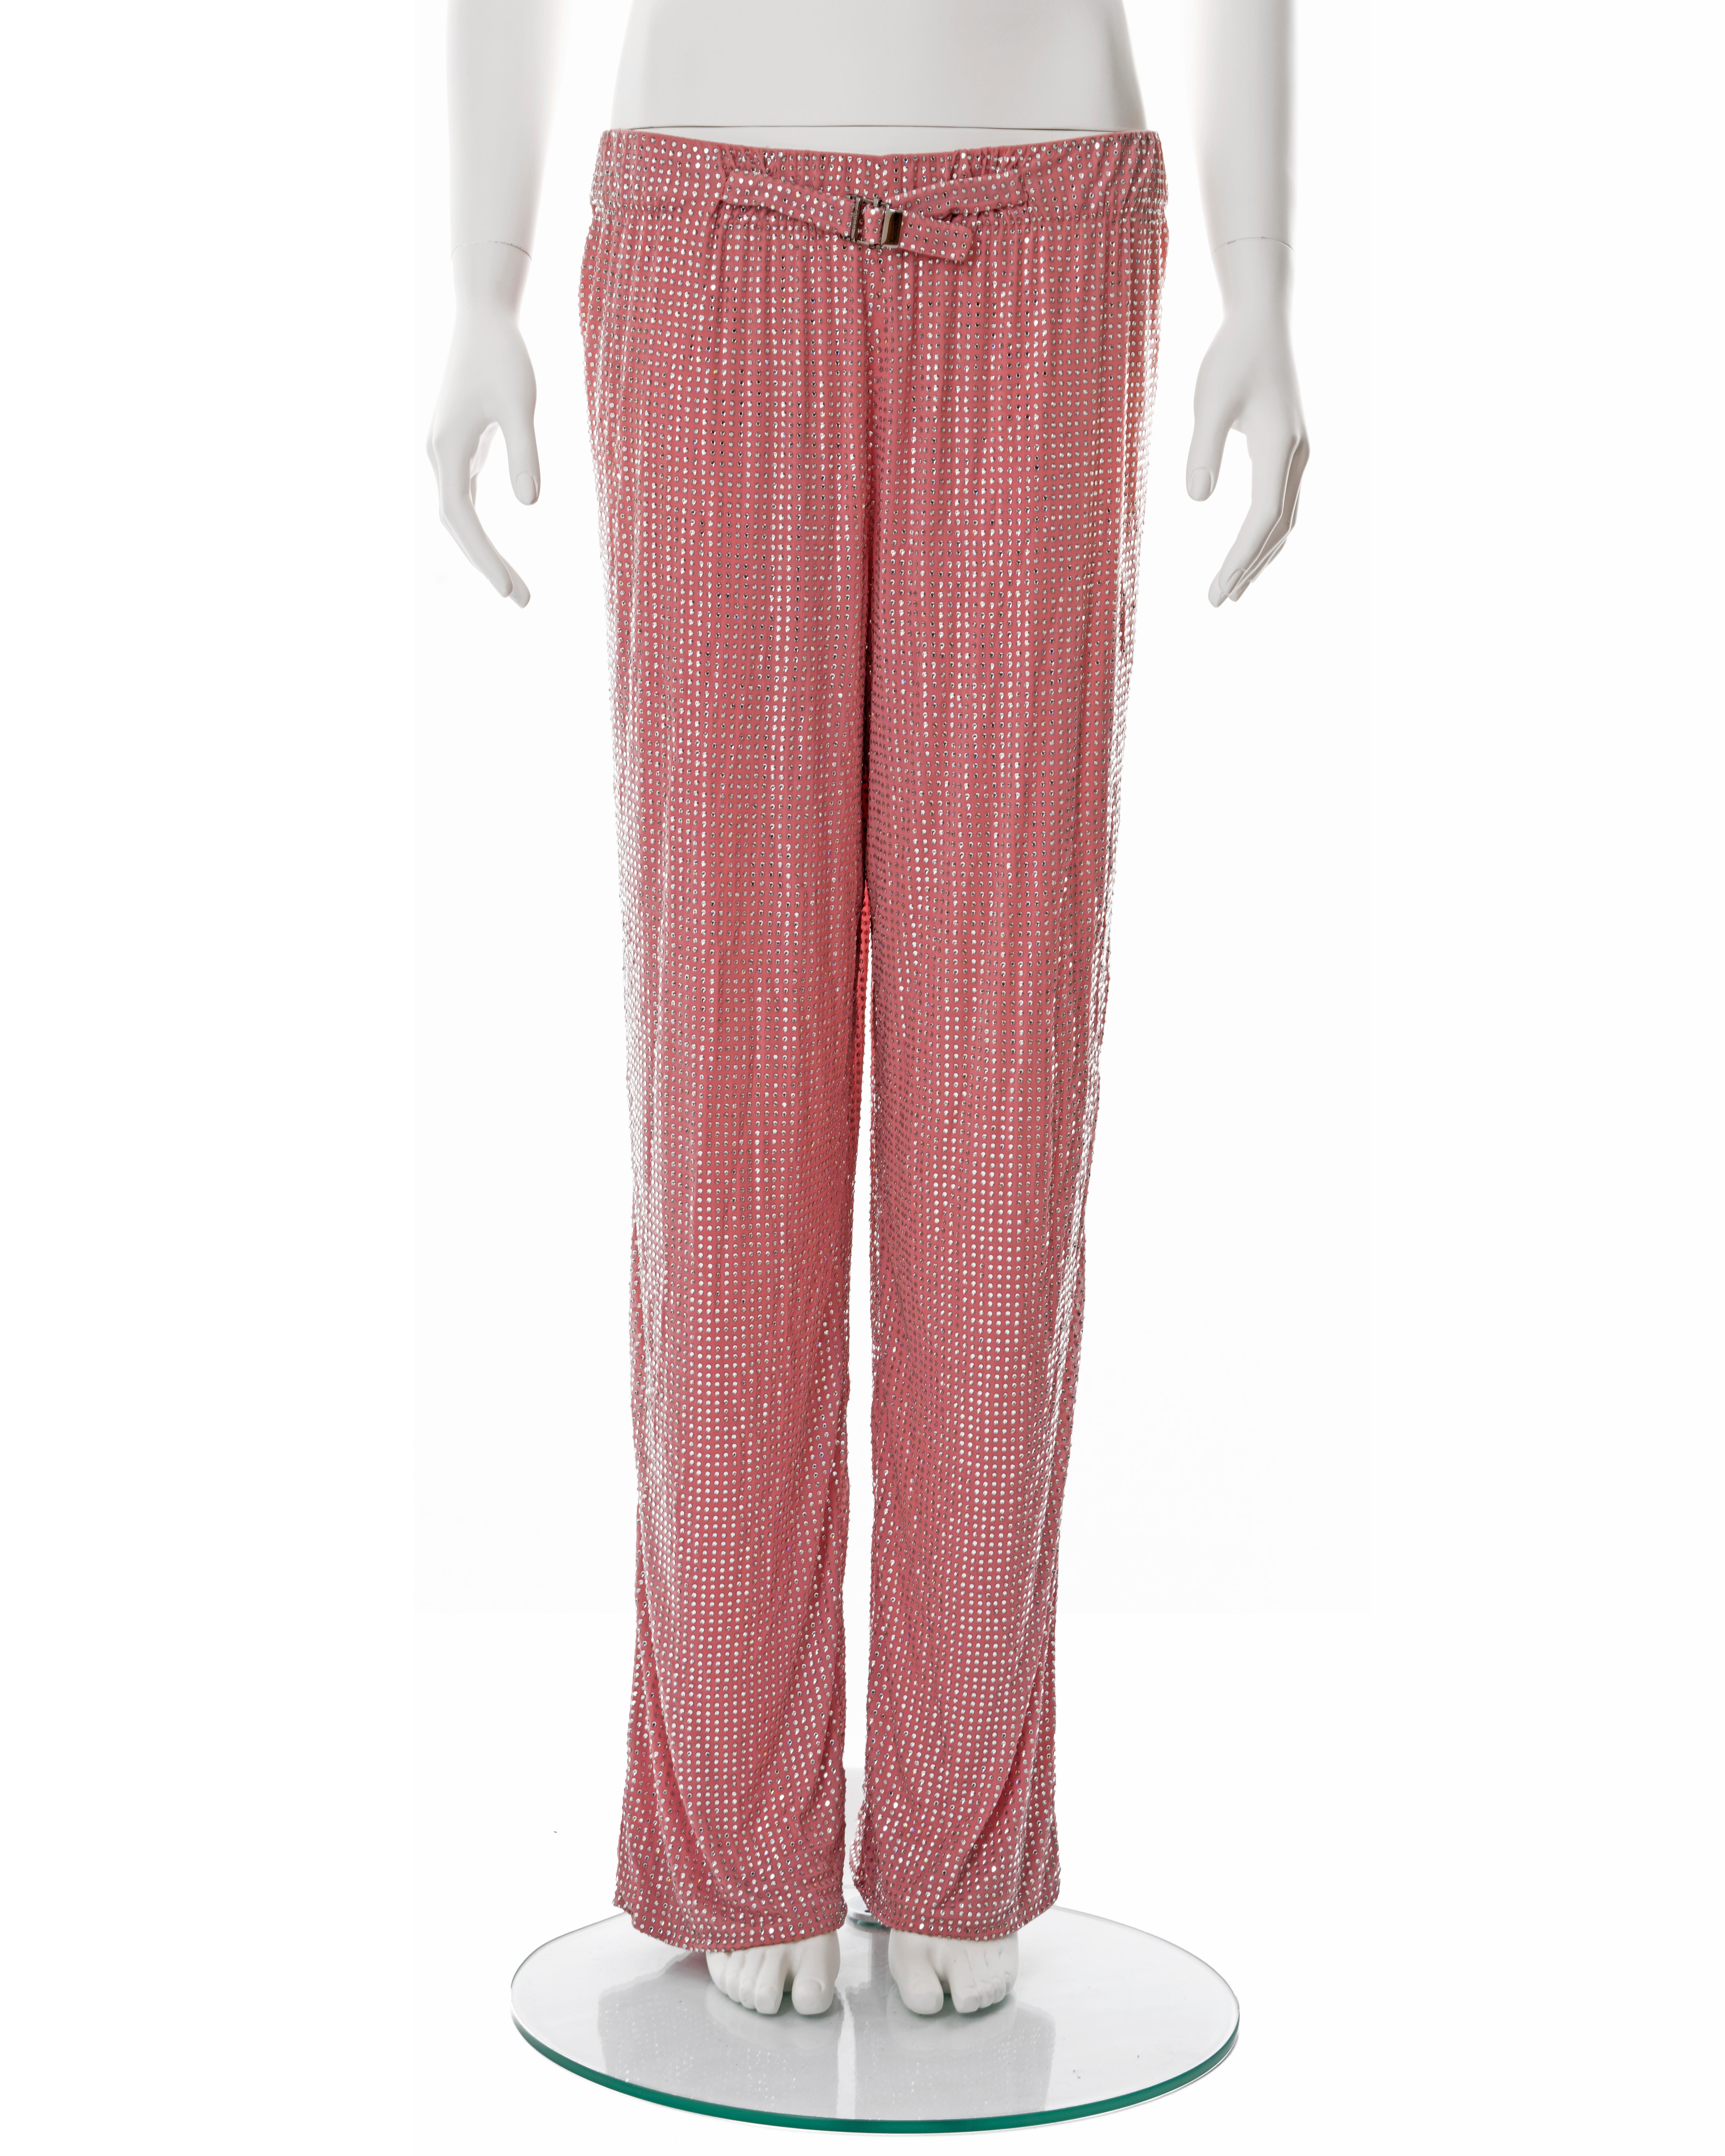 ▪ Gucci pink crystal beaded evening pants
▪ Designed by Tom Ford
▪ Sold by One of a Kind Archive
▪ Straight leg 
▪ Elastic waistband with Gucci signed metal buckle
▪ Low rise 
▪ Limited edition 
▪ IT 40 - FR 36 - UK 8
▪ Made in Italy

All